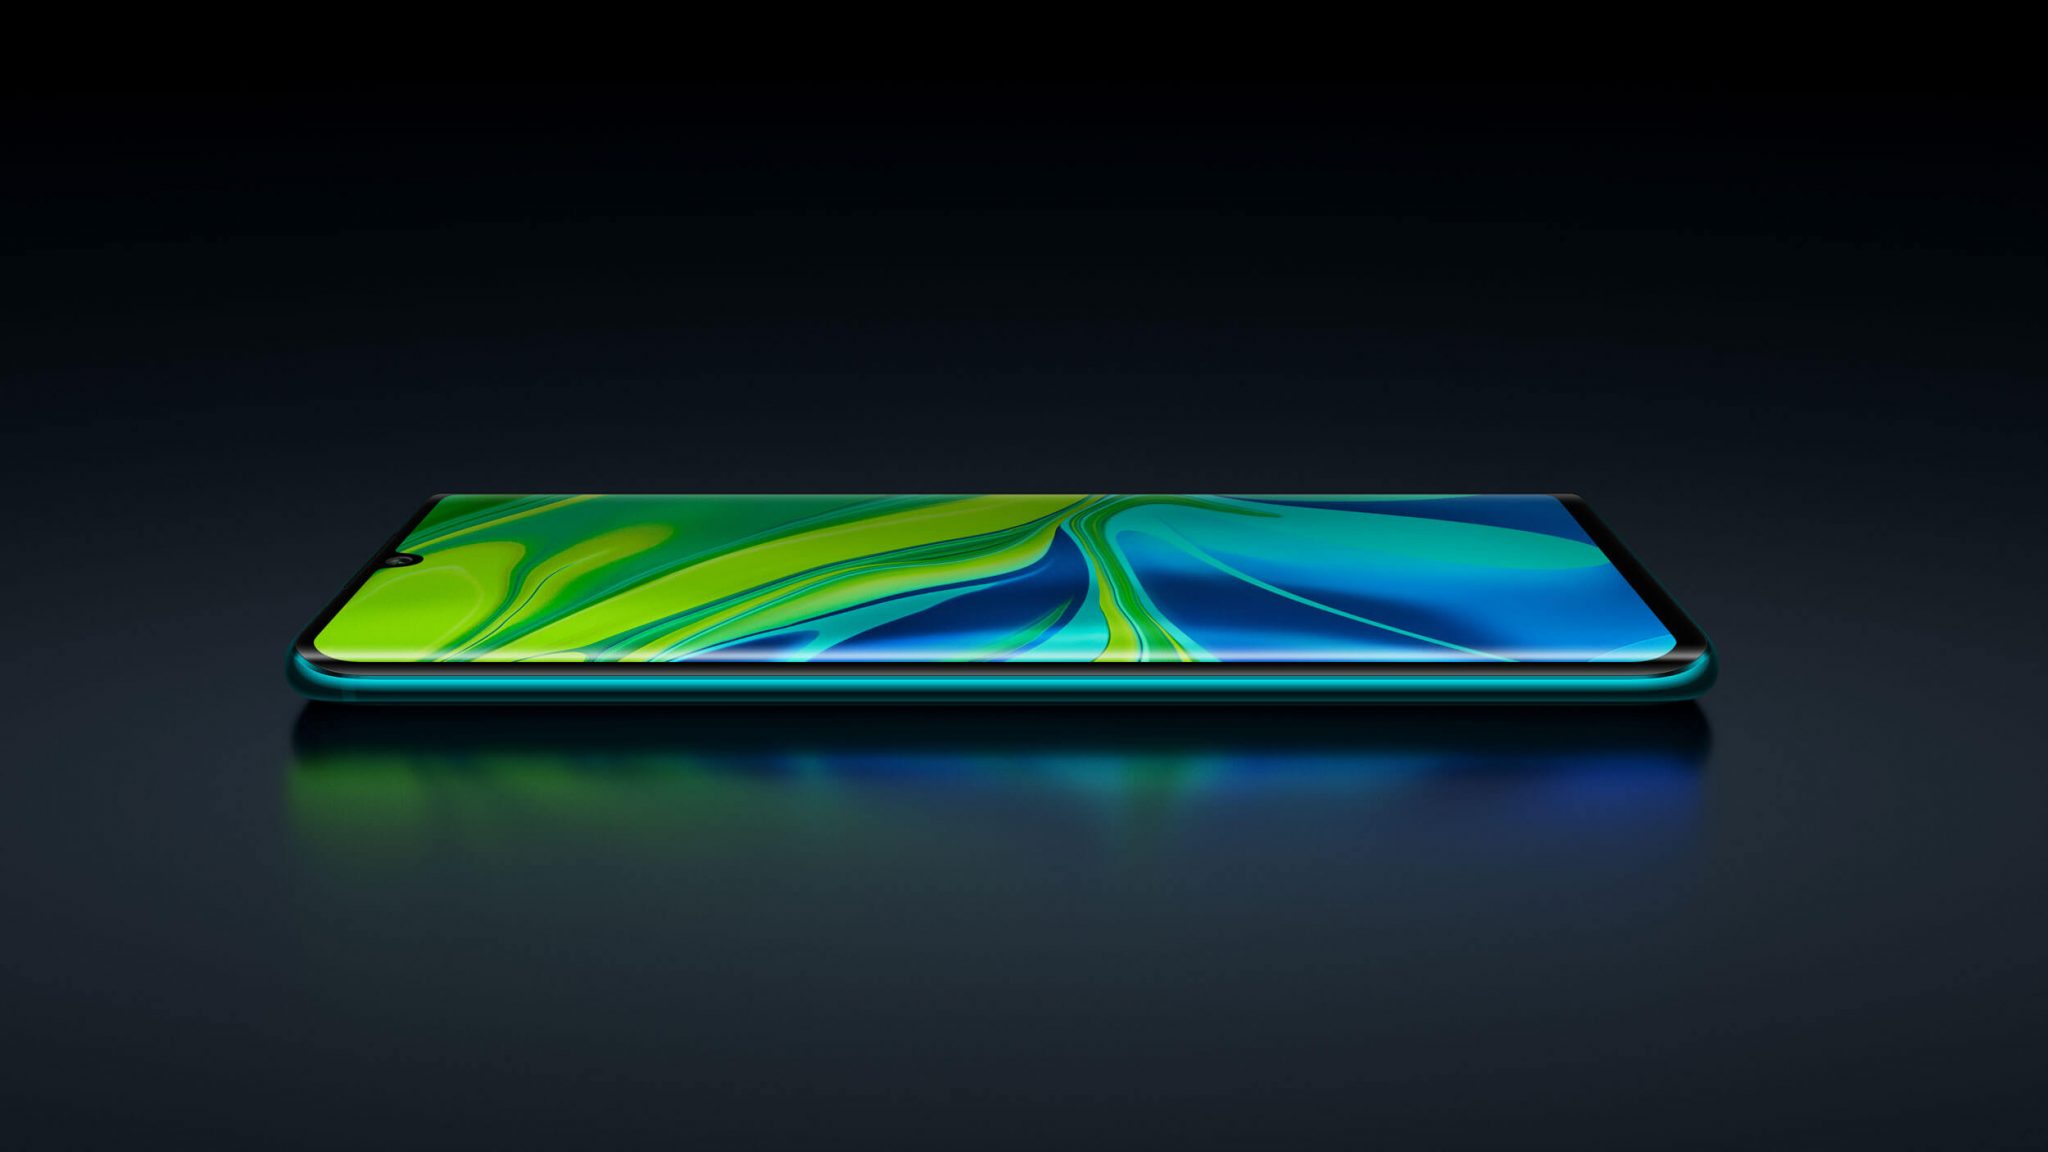 Mi Note 10 features an incredible 6.47” 3D curved AMOLED display. The edge-to-edge display offers slimmer bezels than ever before for a totally immersive experience, while the 400,000:1 contrast ratio allows for deeper blacks and higher color fidelity.